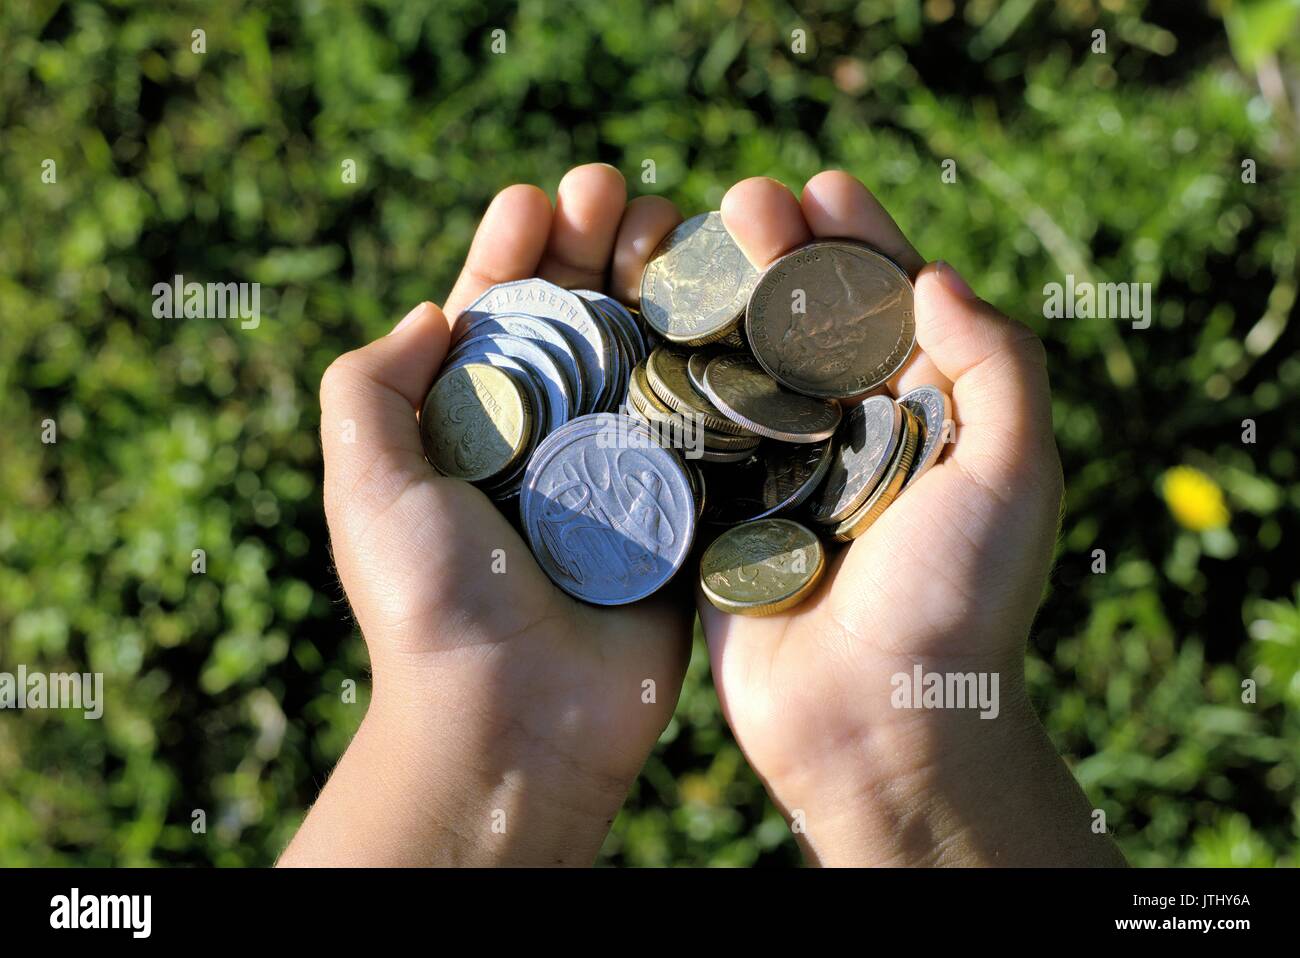 Two hands full of coins. Australian coins in kids hands Stock Photo